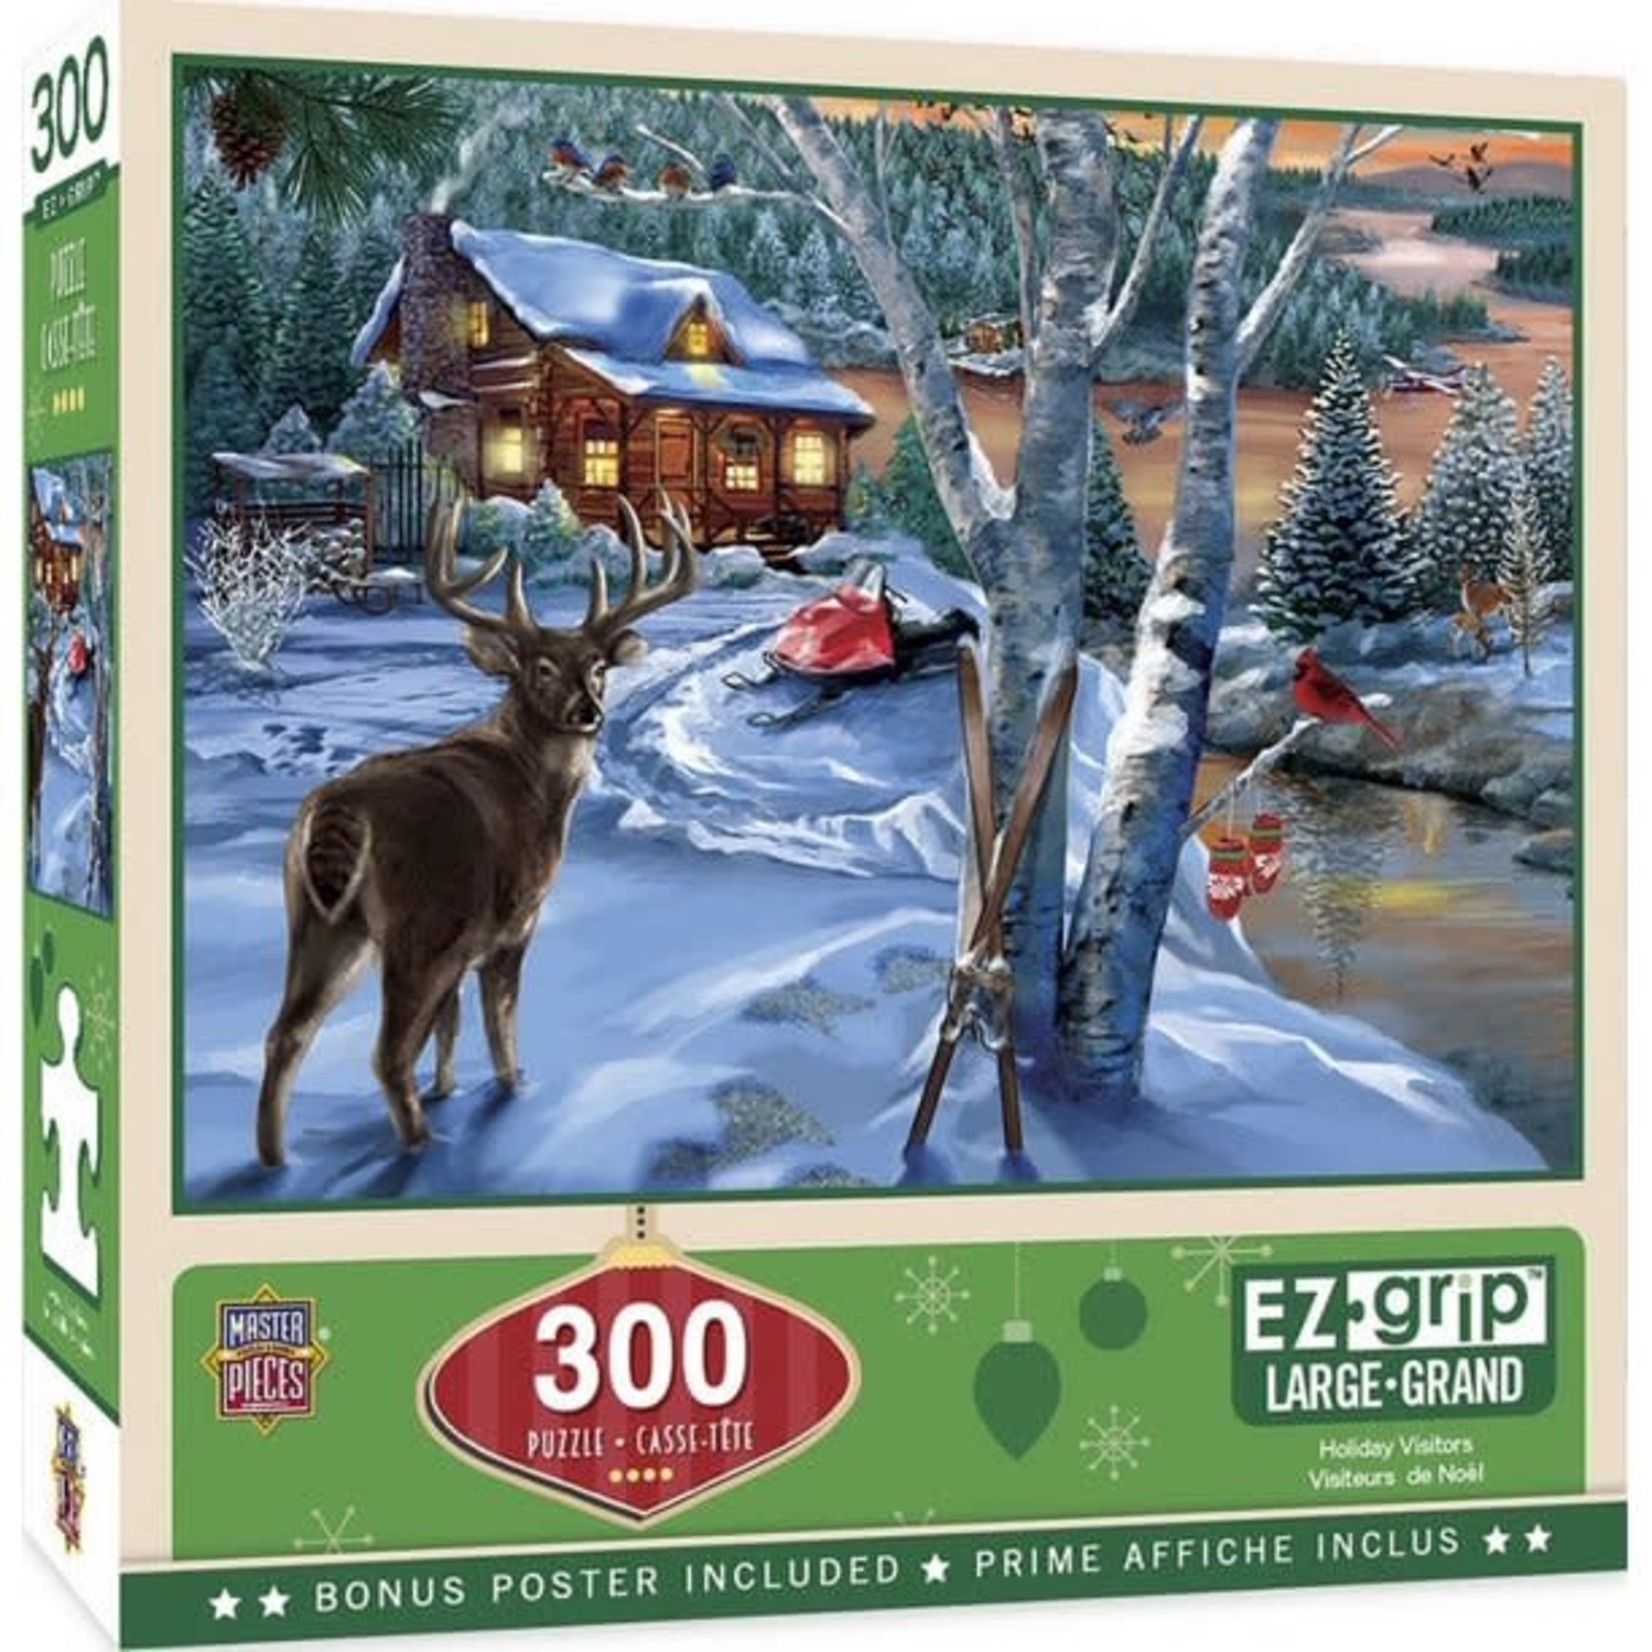 HOLIDAY VISITOR 300 PC PUZZLE